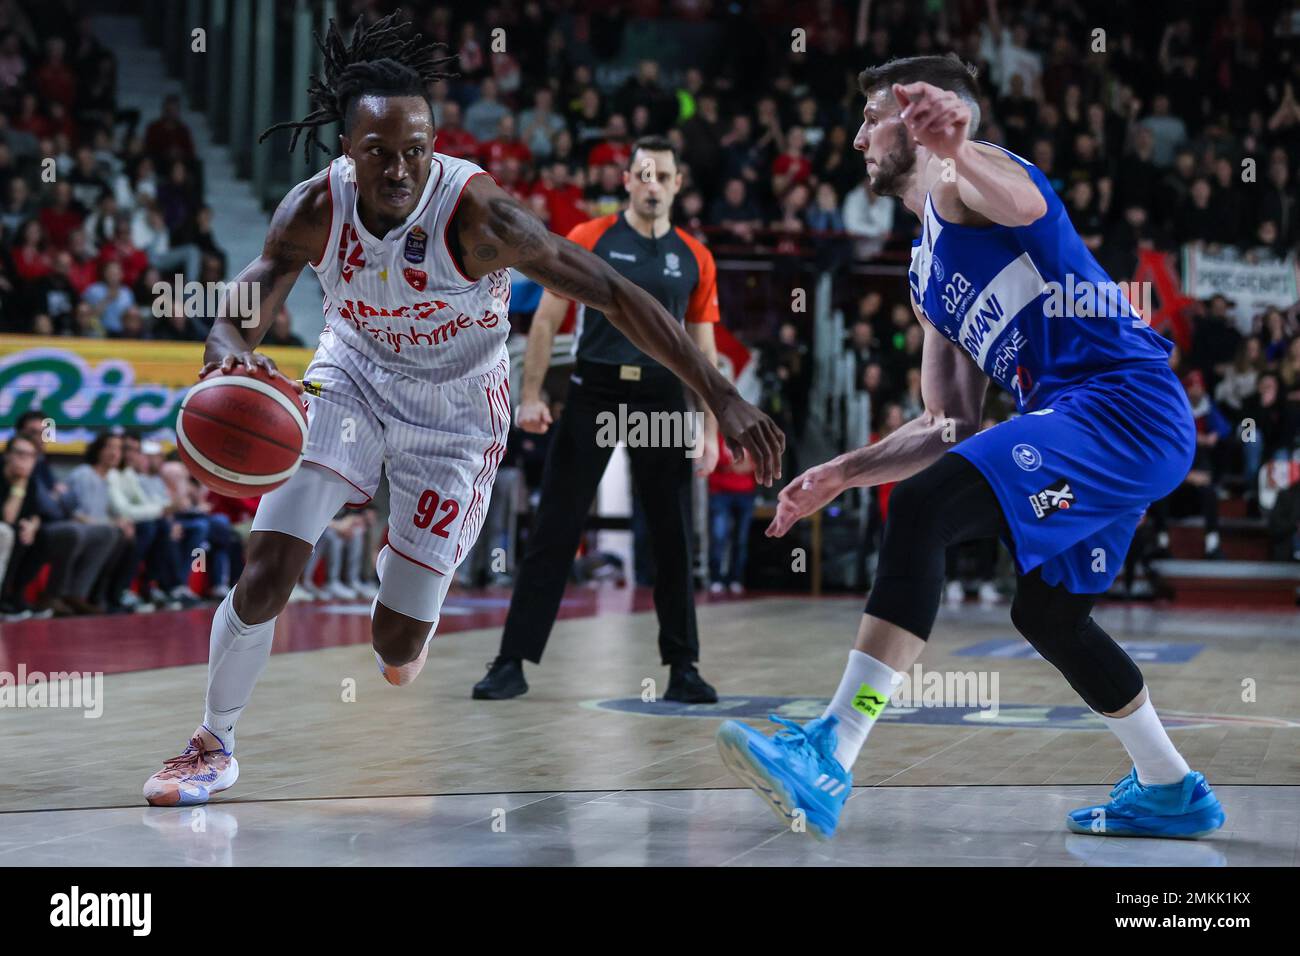 Varese, Italy. 28th Jan, 2023. Jaron Johnson #92 of Pallacanestro Varese OpenJobMetis in action during LBA Lega Basket A 2022/23 Regular Season game between Pallacanestro Varese OpenJobMetis and Germani Brescia at Palasport Lino Oldrini, Varese, Italy on January 28, 2023 Credit: Independent Photo Agency/Alamy Live News Stock Photo